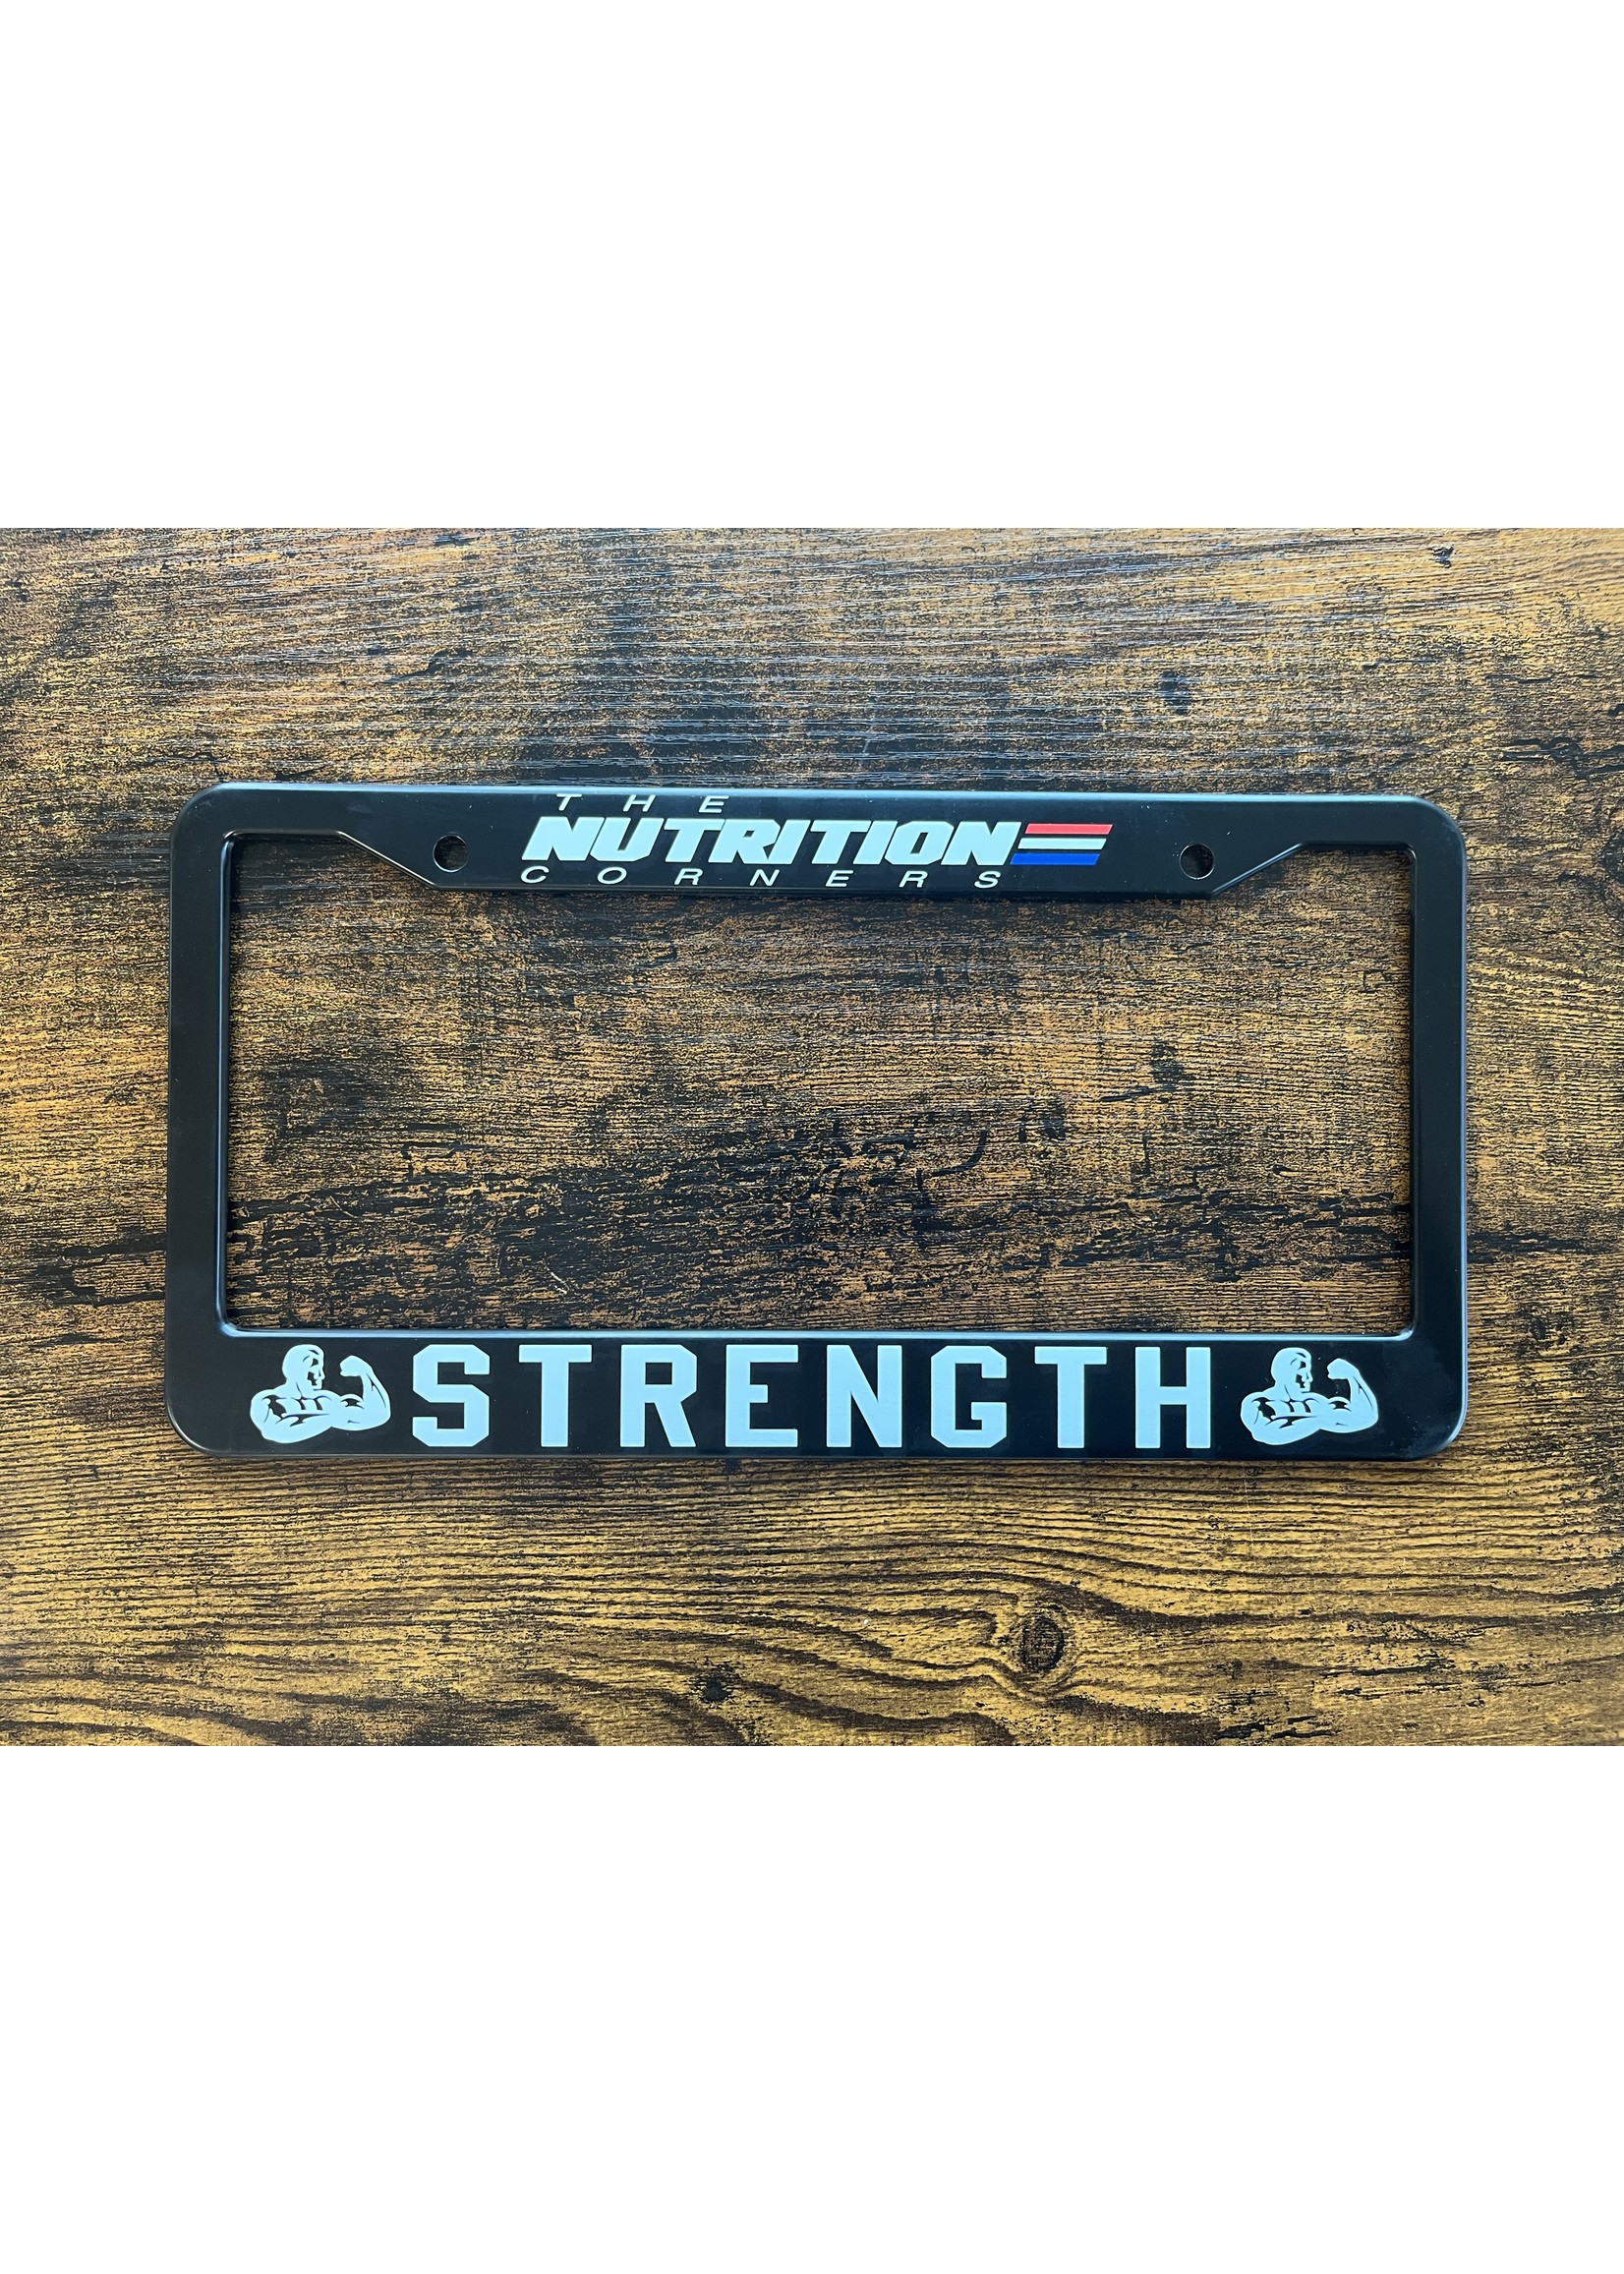 Nutrition Corners NC License Plate Cover Black